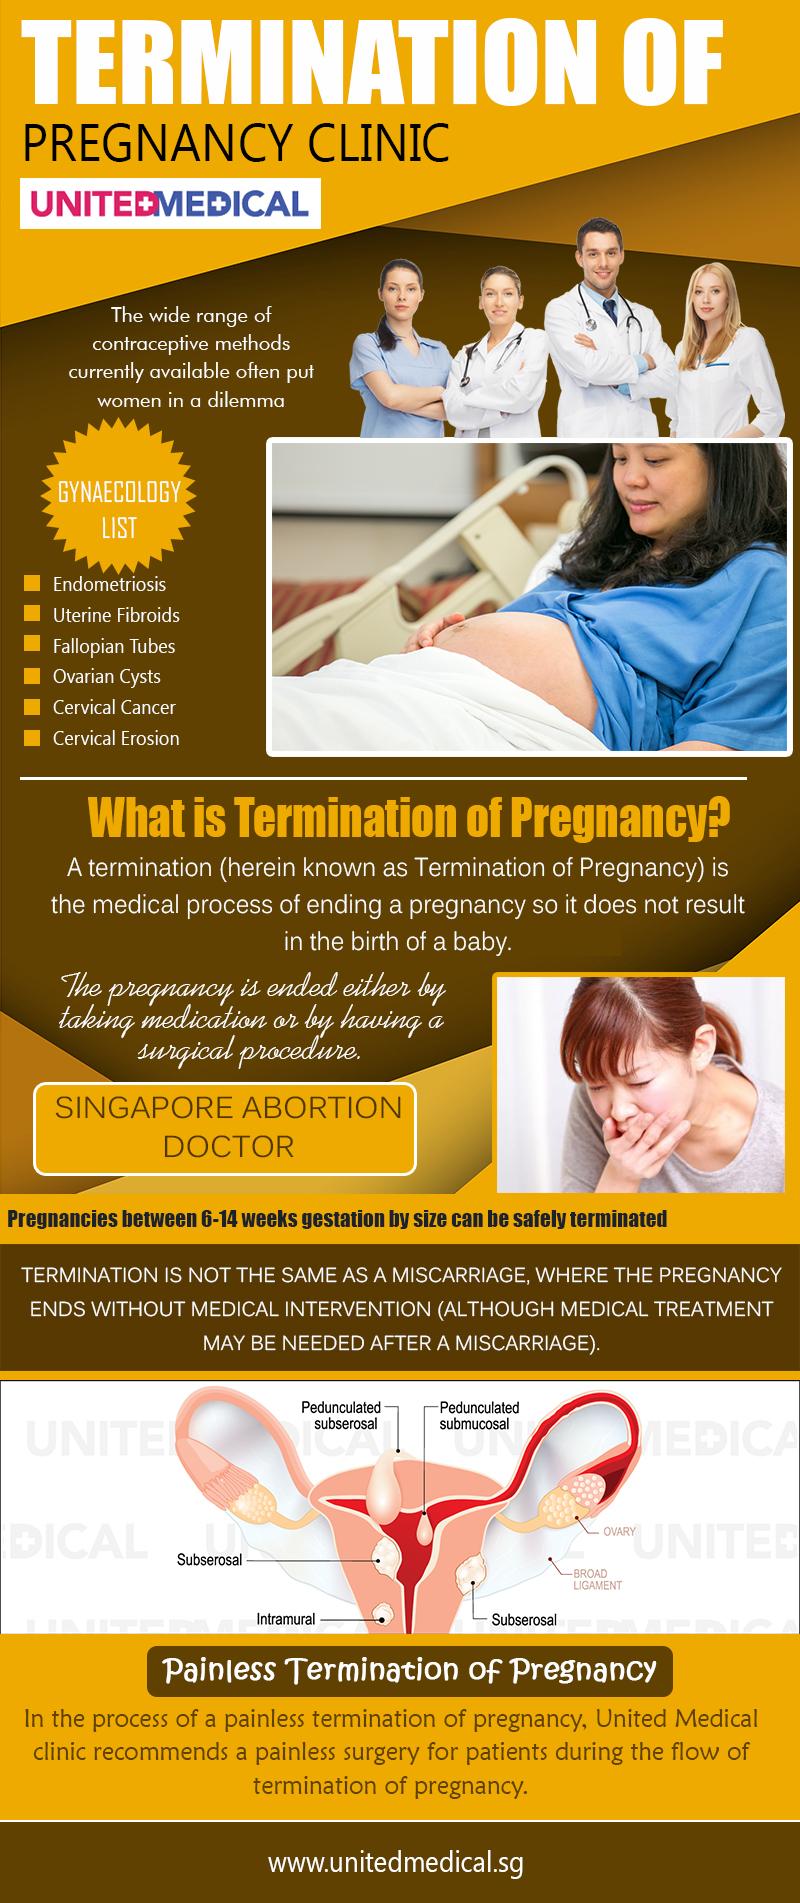 Termination of Pregnancy Clinic